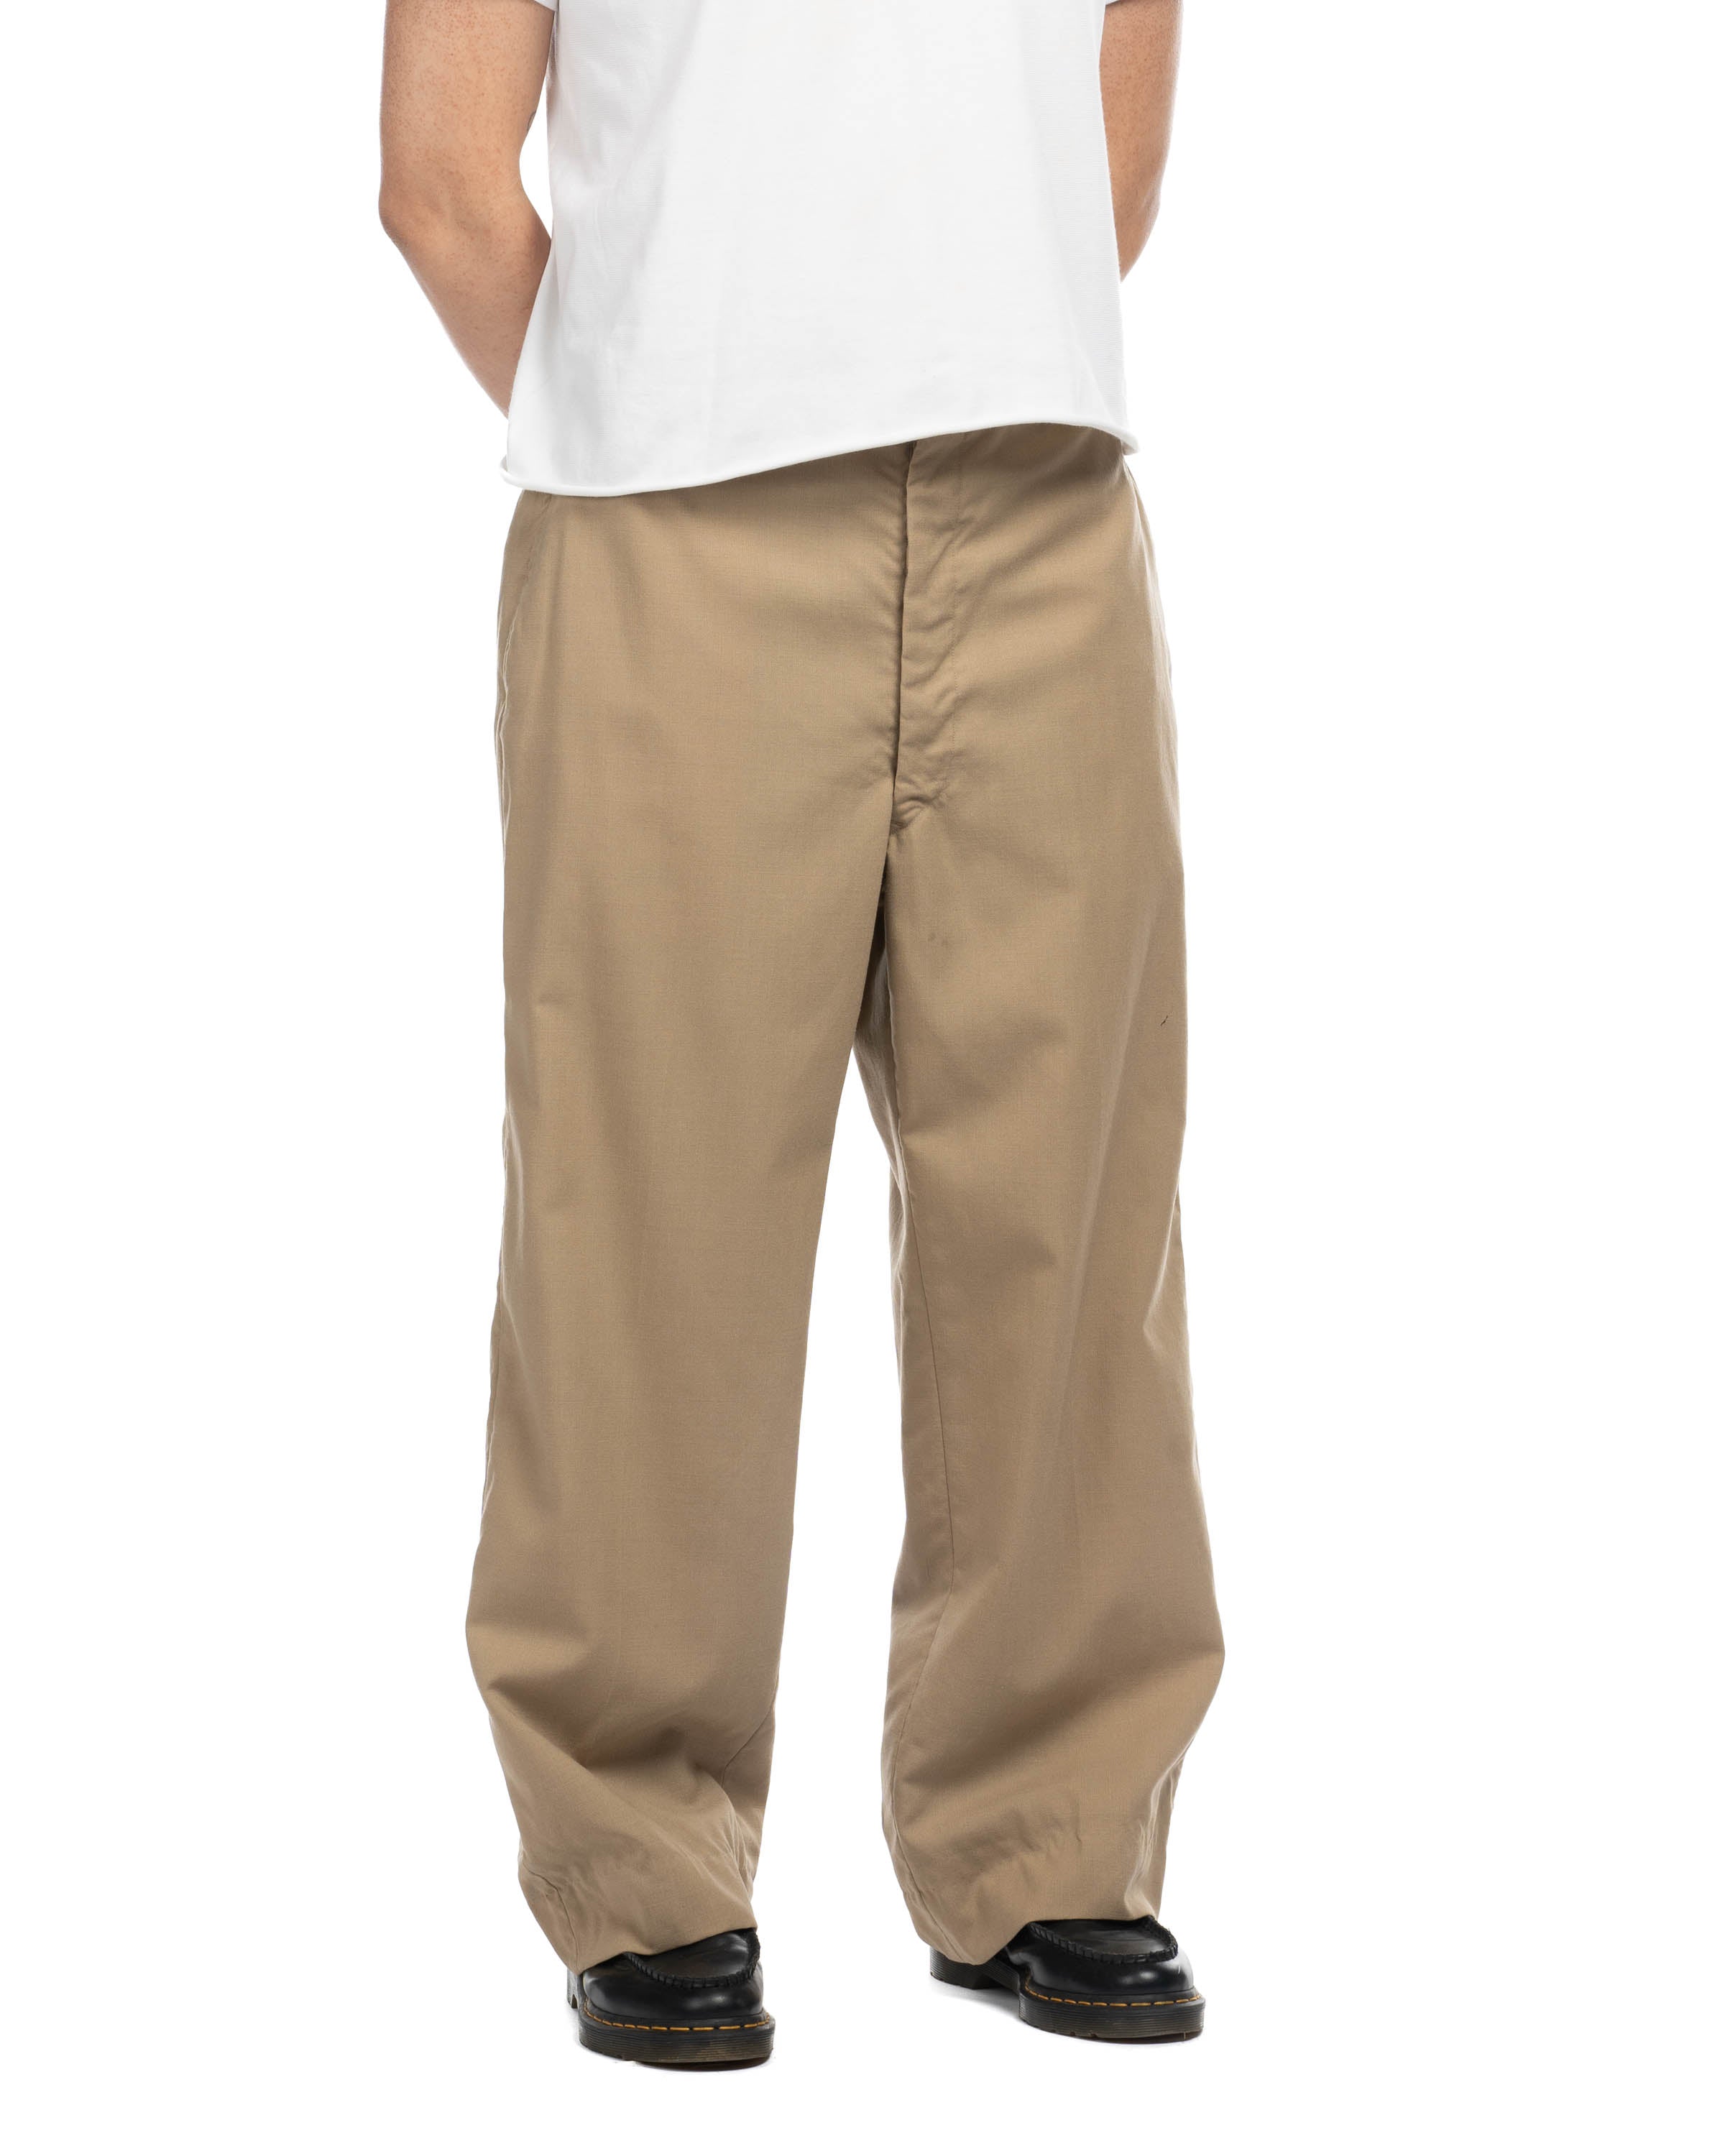 Rebar M4 Low Rise DuraStretch Made Tough Double Front Stackable Straight Leg  Pant | Straight leg pants, Straight leg, Work pants